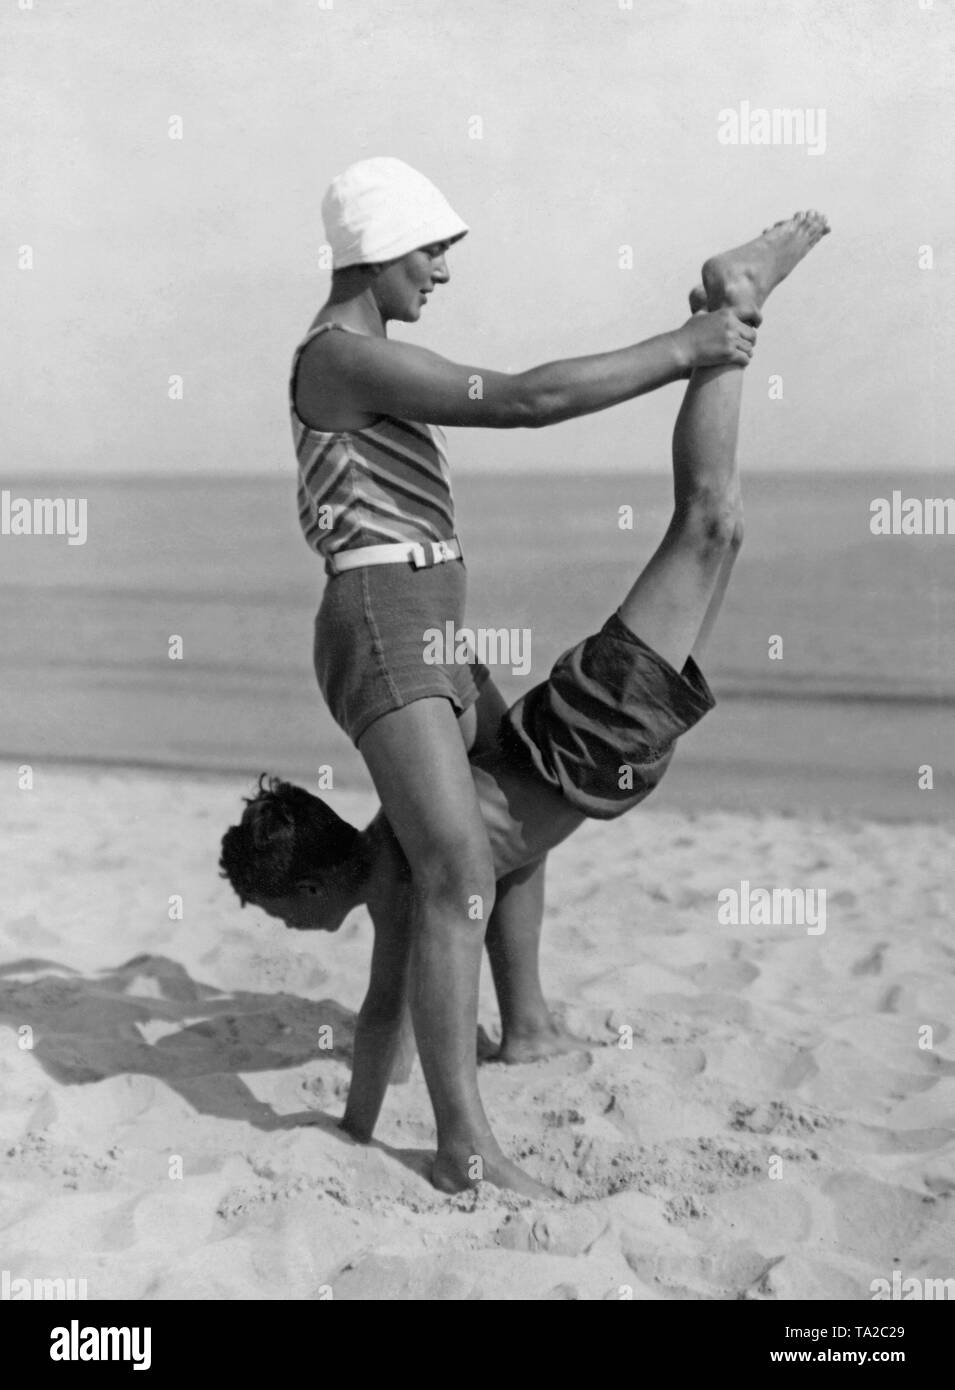 A woman and a man doing a partner exercise in the 1930s or 1940s (undated shot). Photo: Wanda von Debschitz-Kunowski. Stock Photo